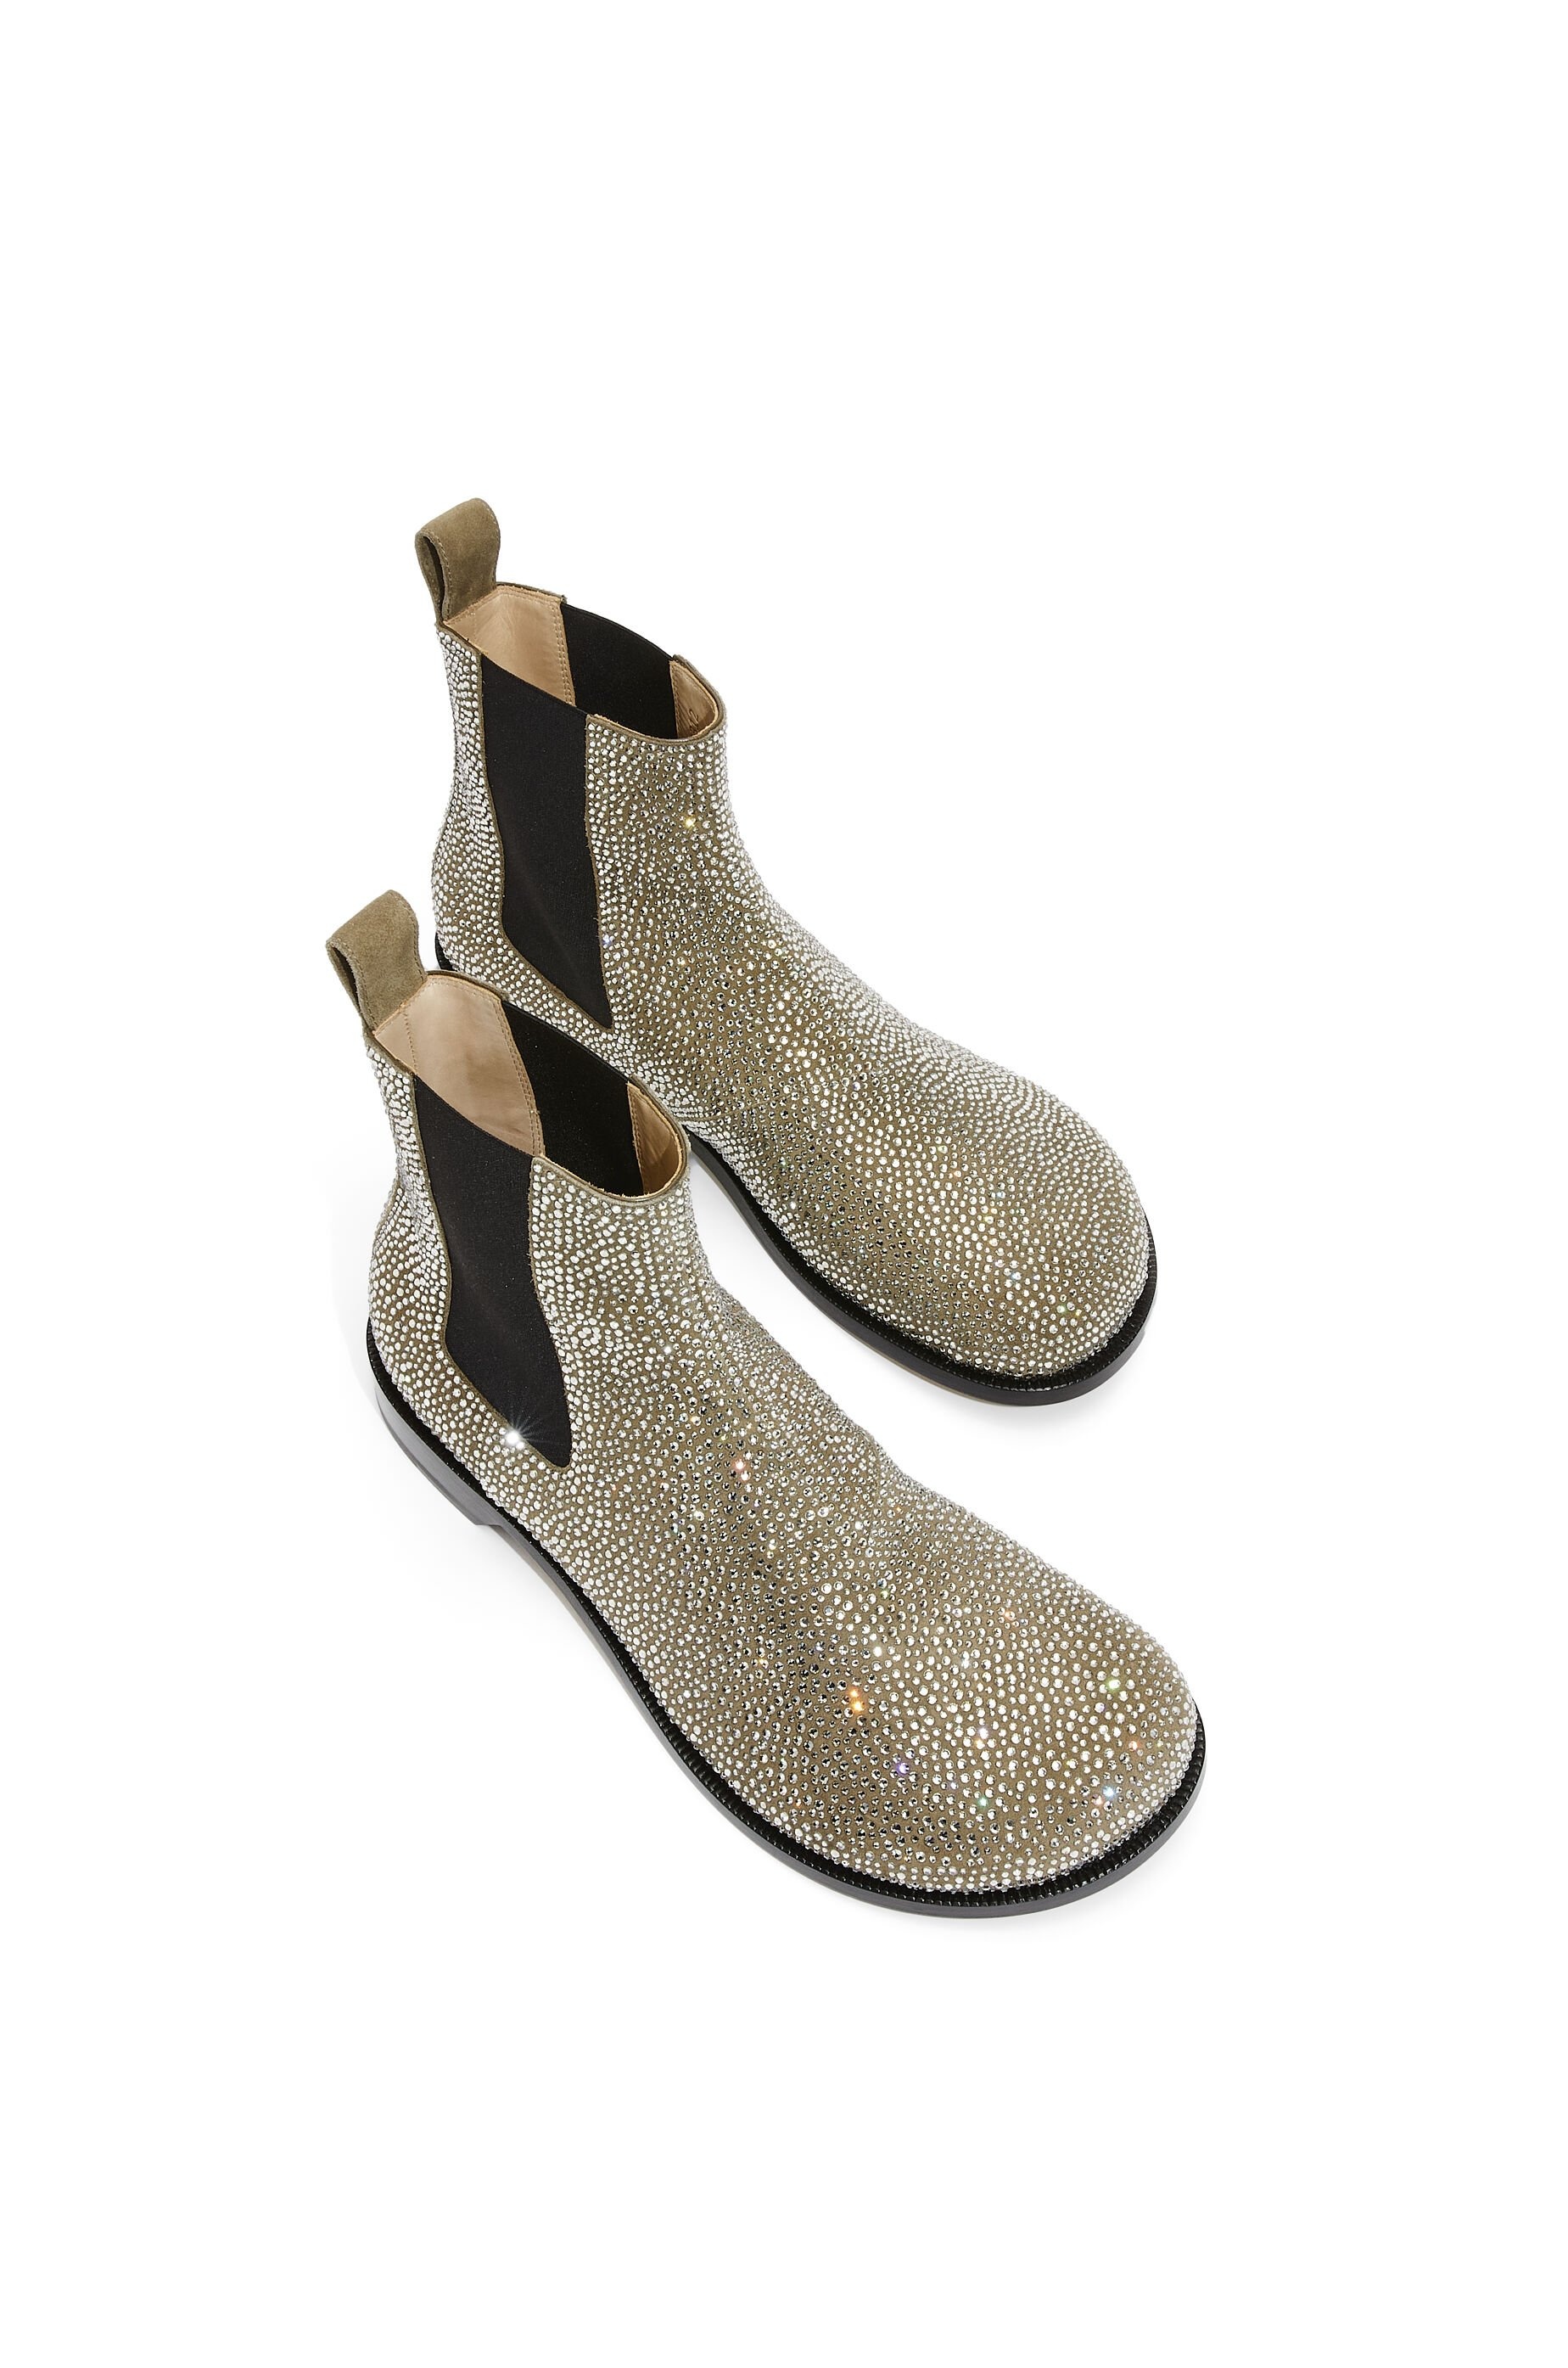 Campo Chelsea boot in suede calfskin and rhinestones - 3